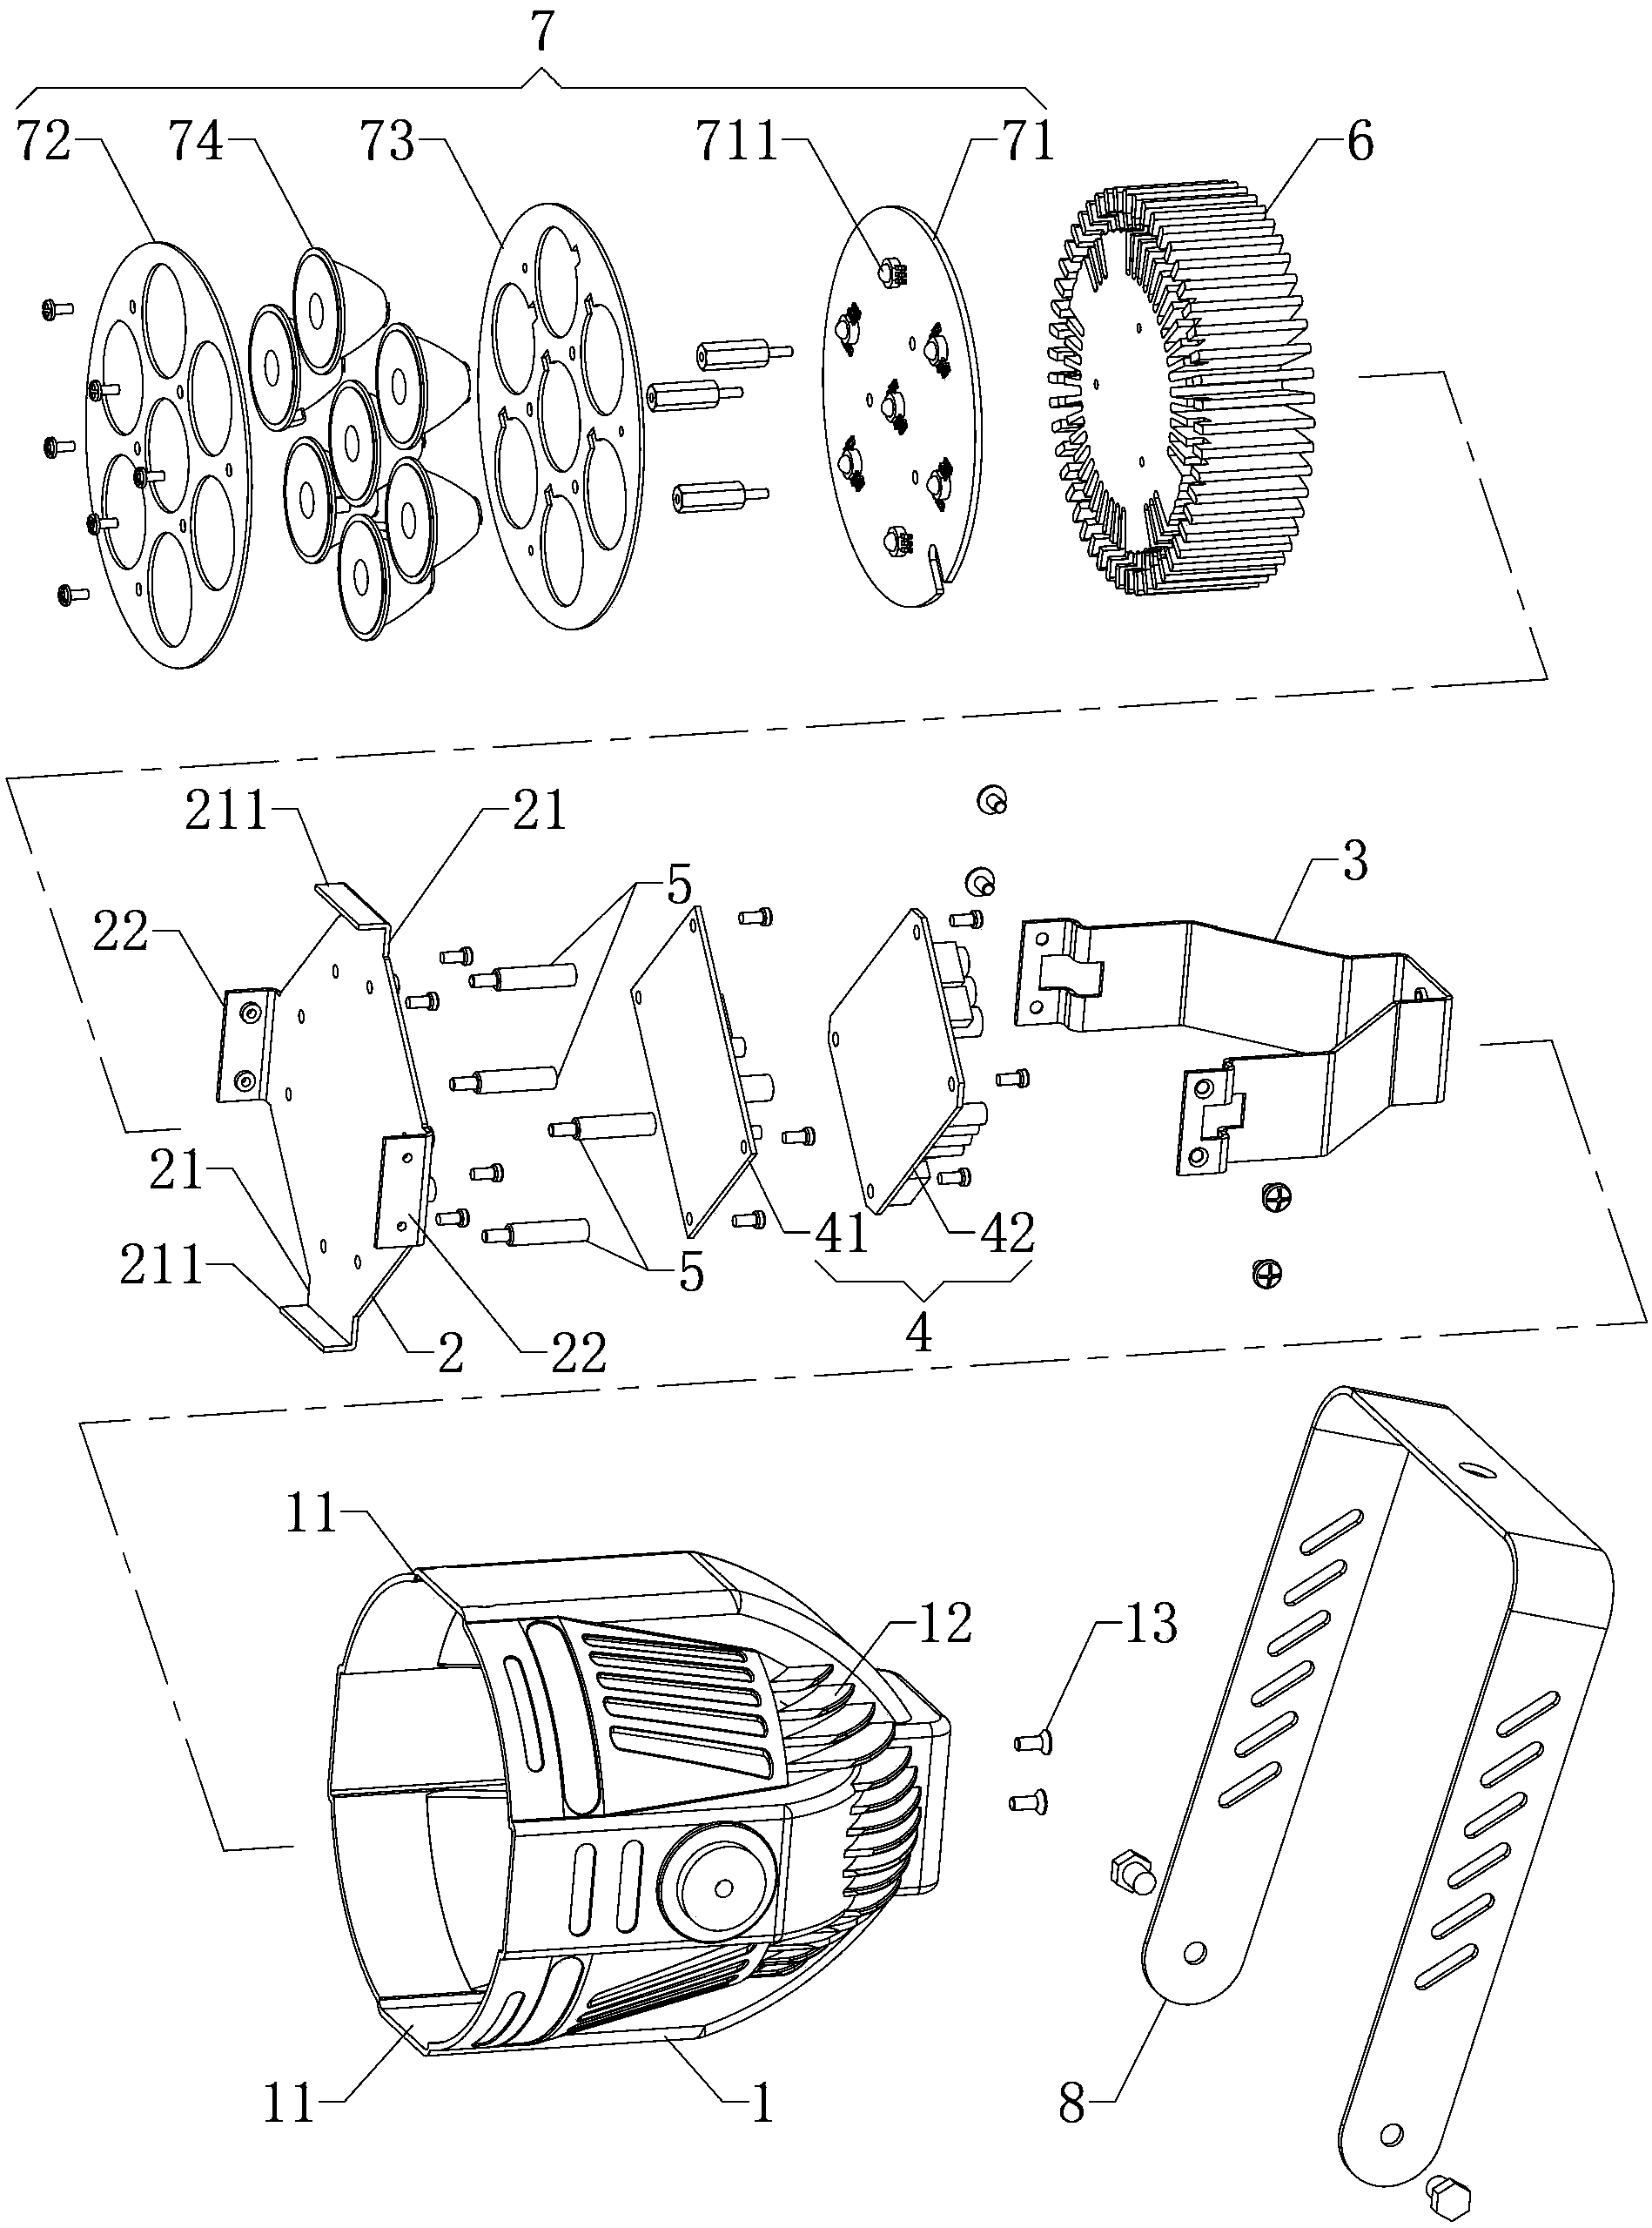 Lamp and fixing structure of internal devices of lamp